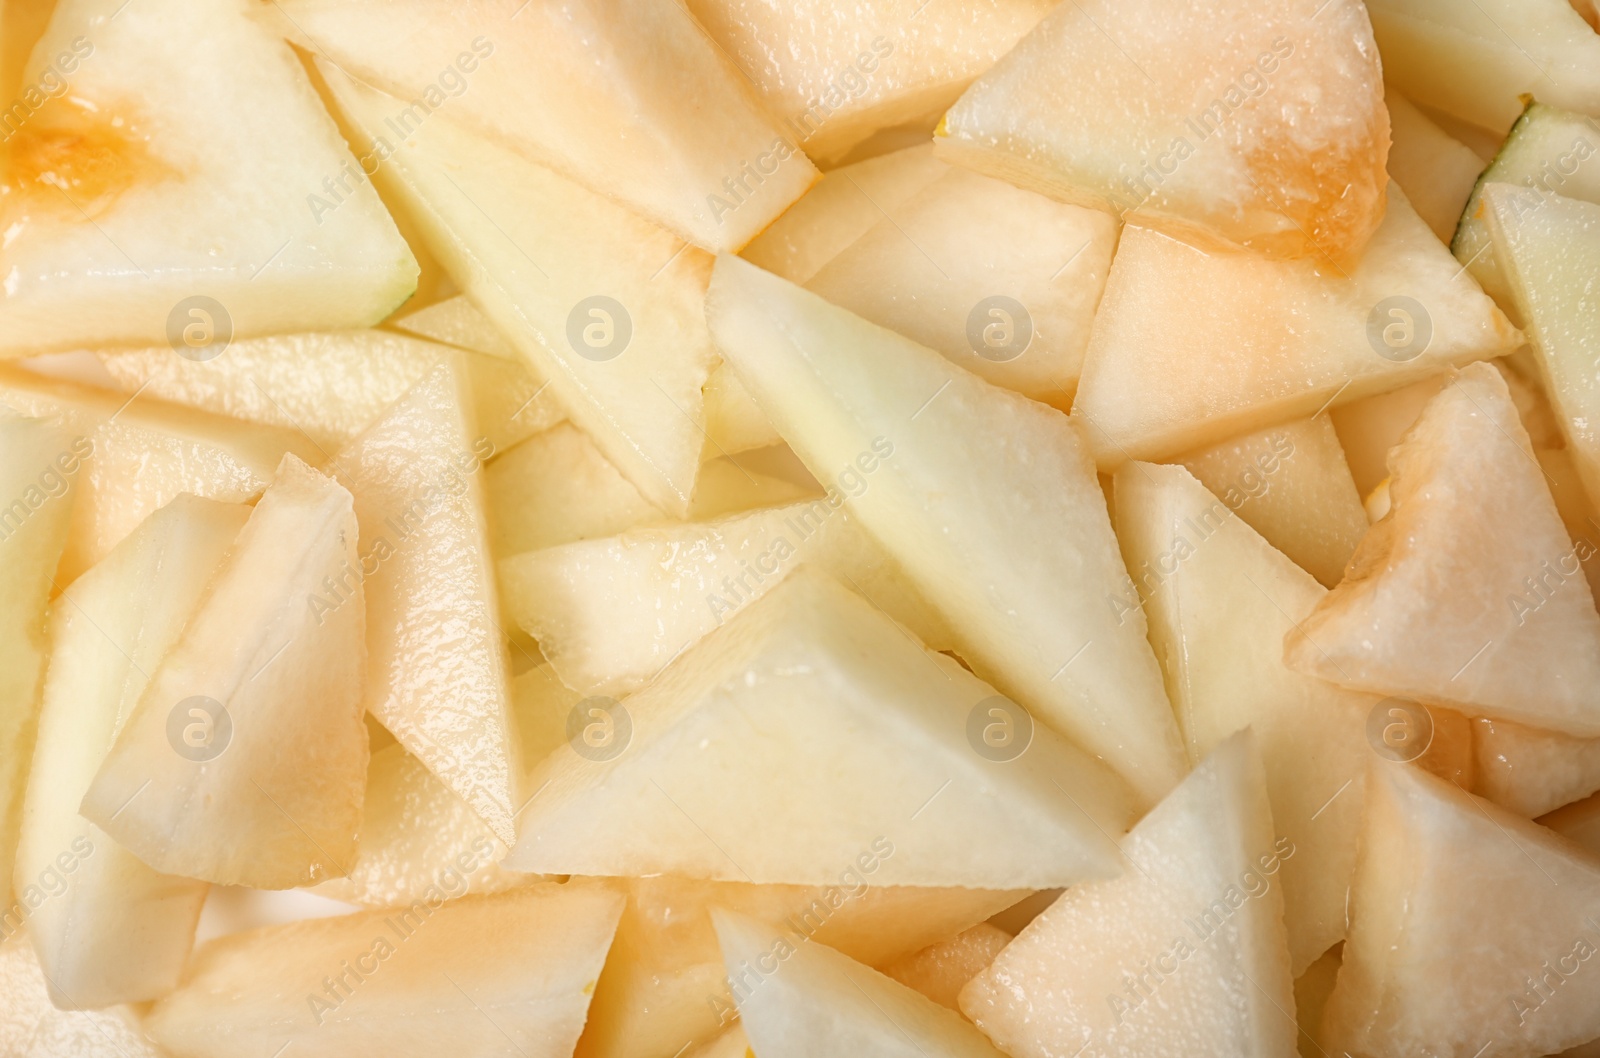 Photo of Ripe tasty melon slices as background, closeup view